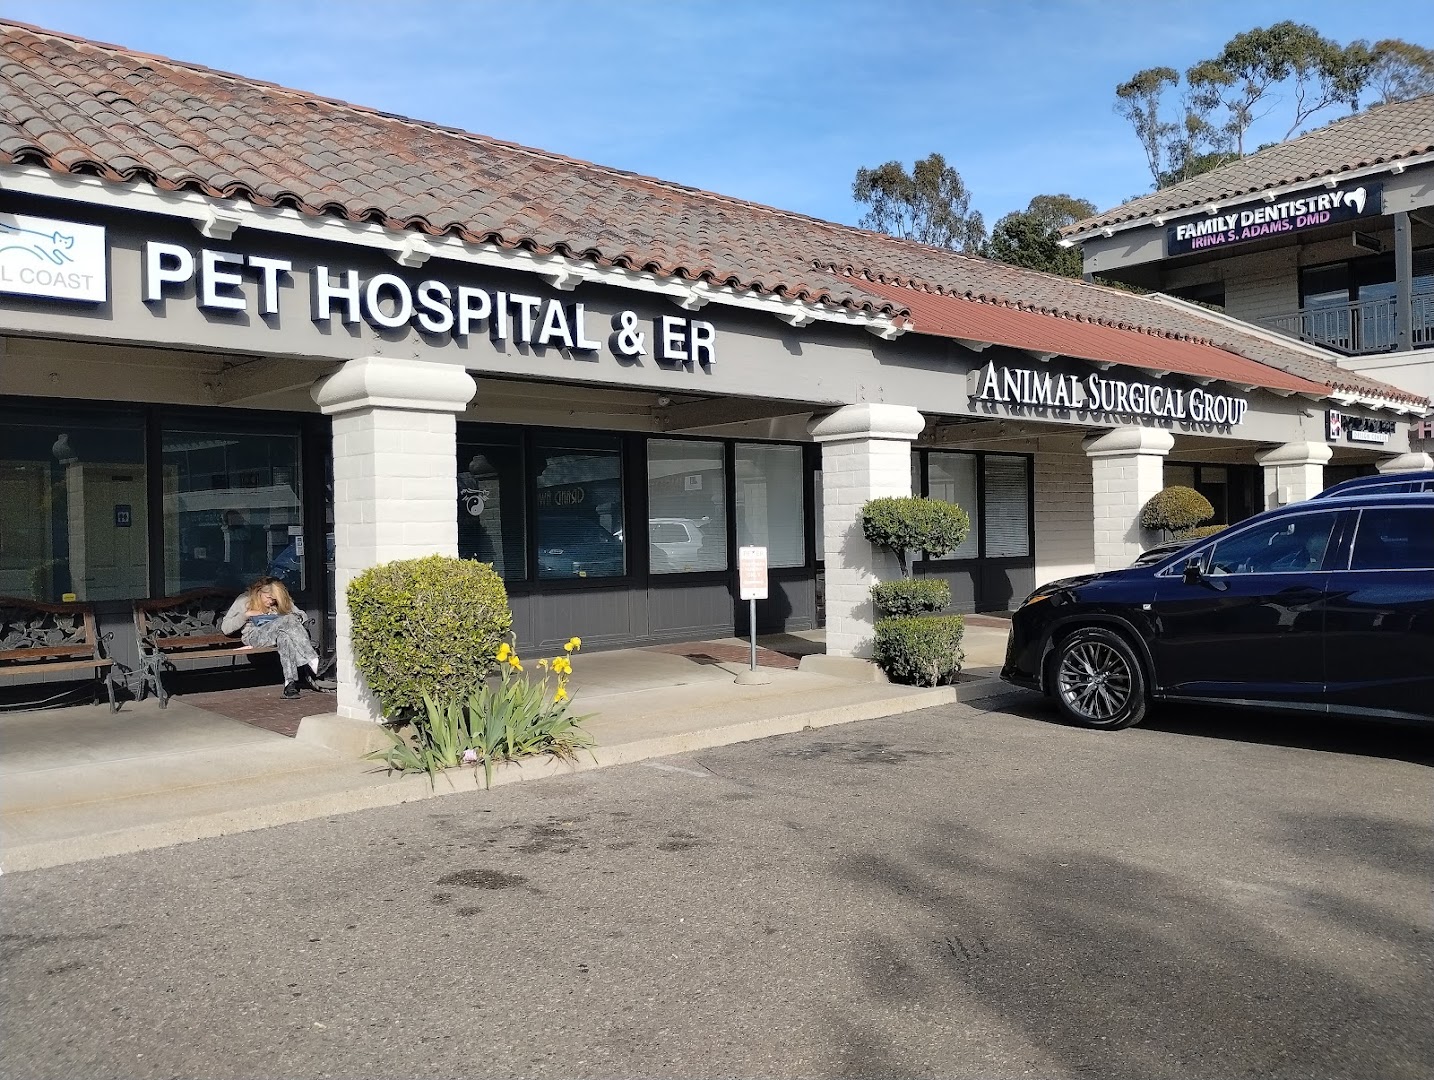 Central Coast Pet Hospital and Emergency